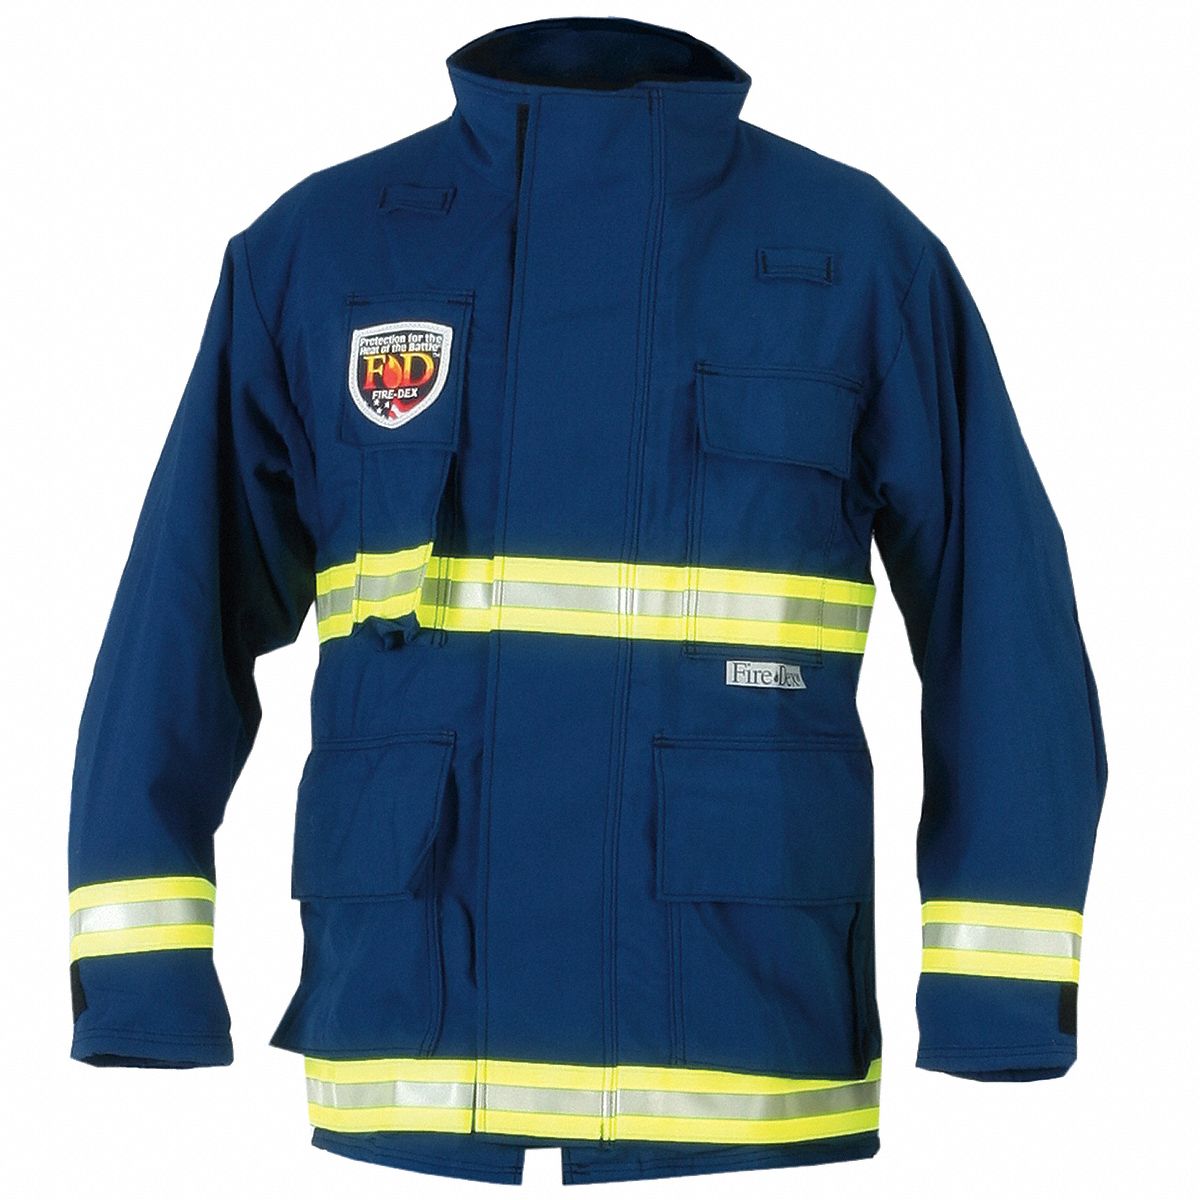 EMS Jacket: 3XL, 58 in Fits Chest Size, Navy